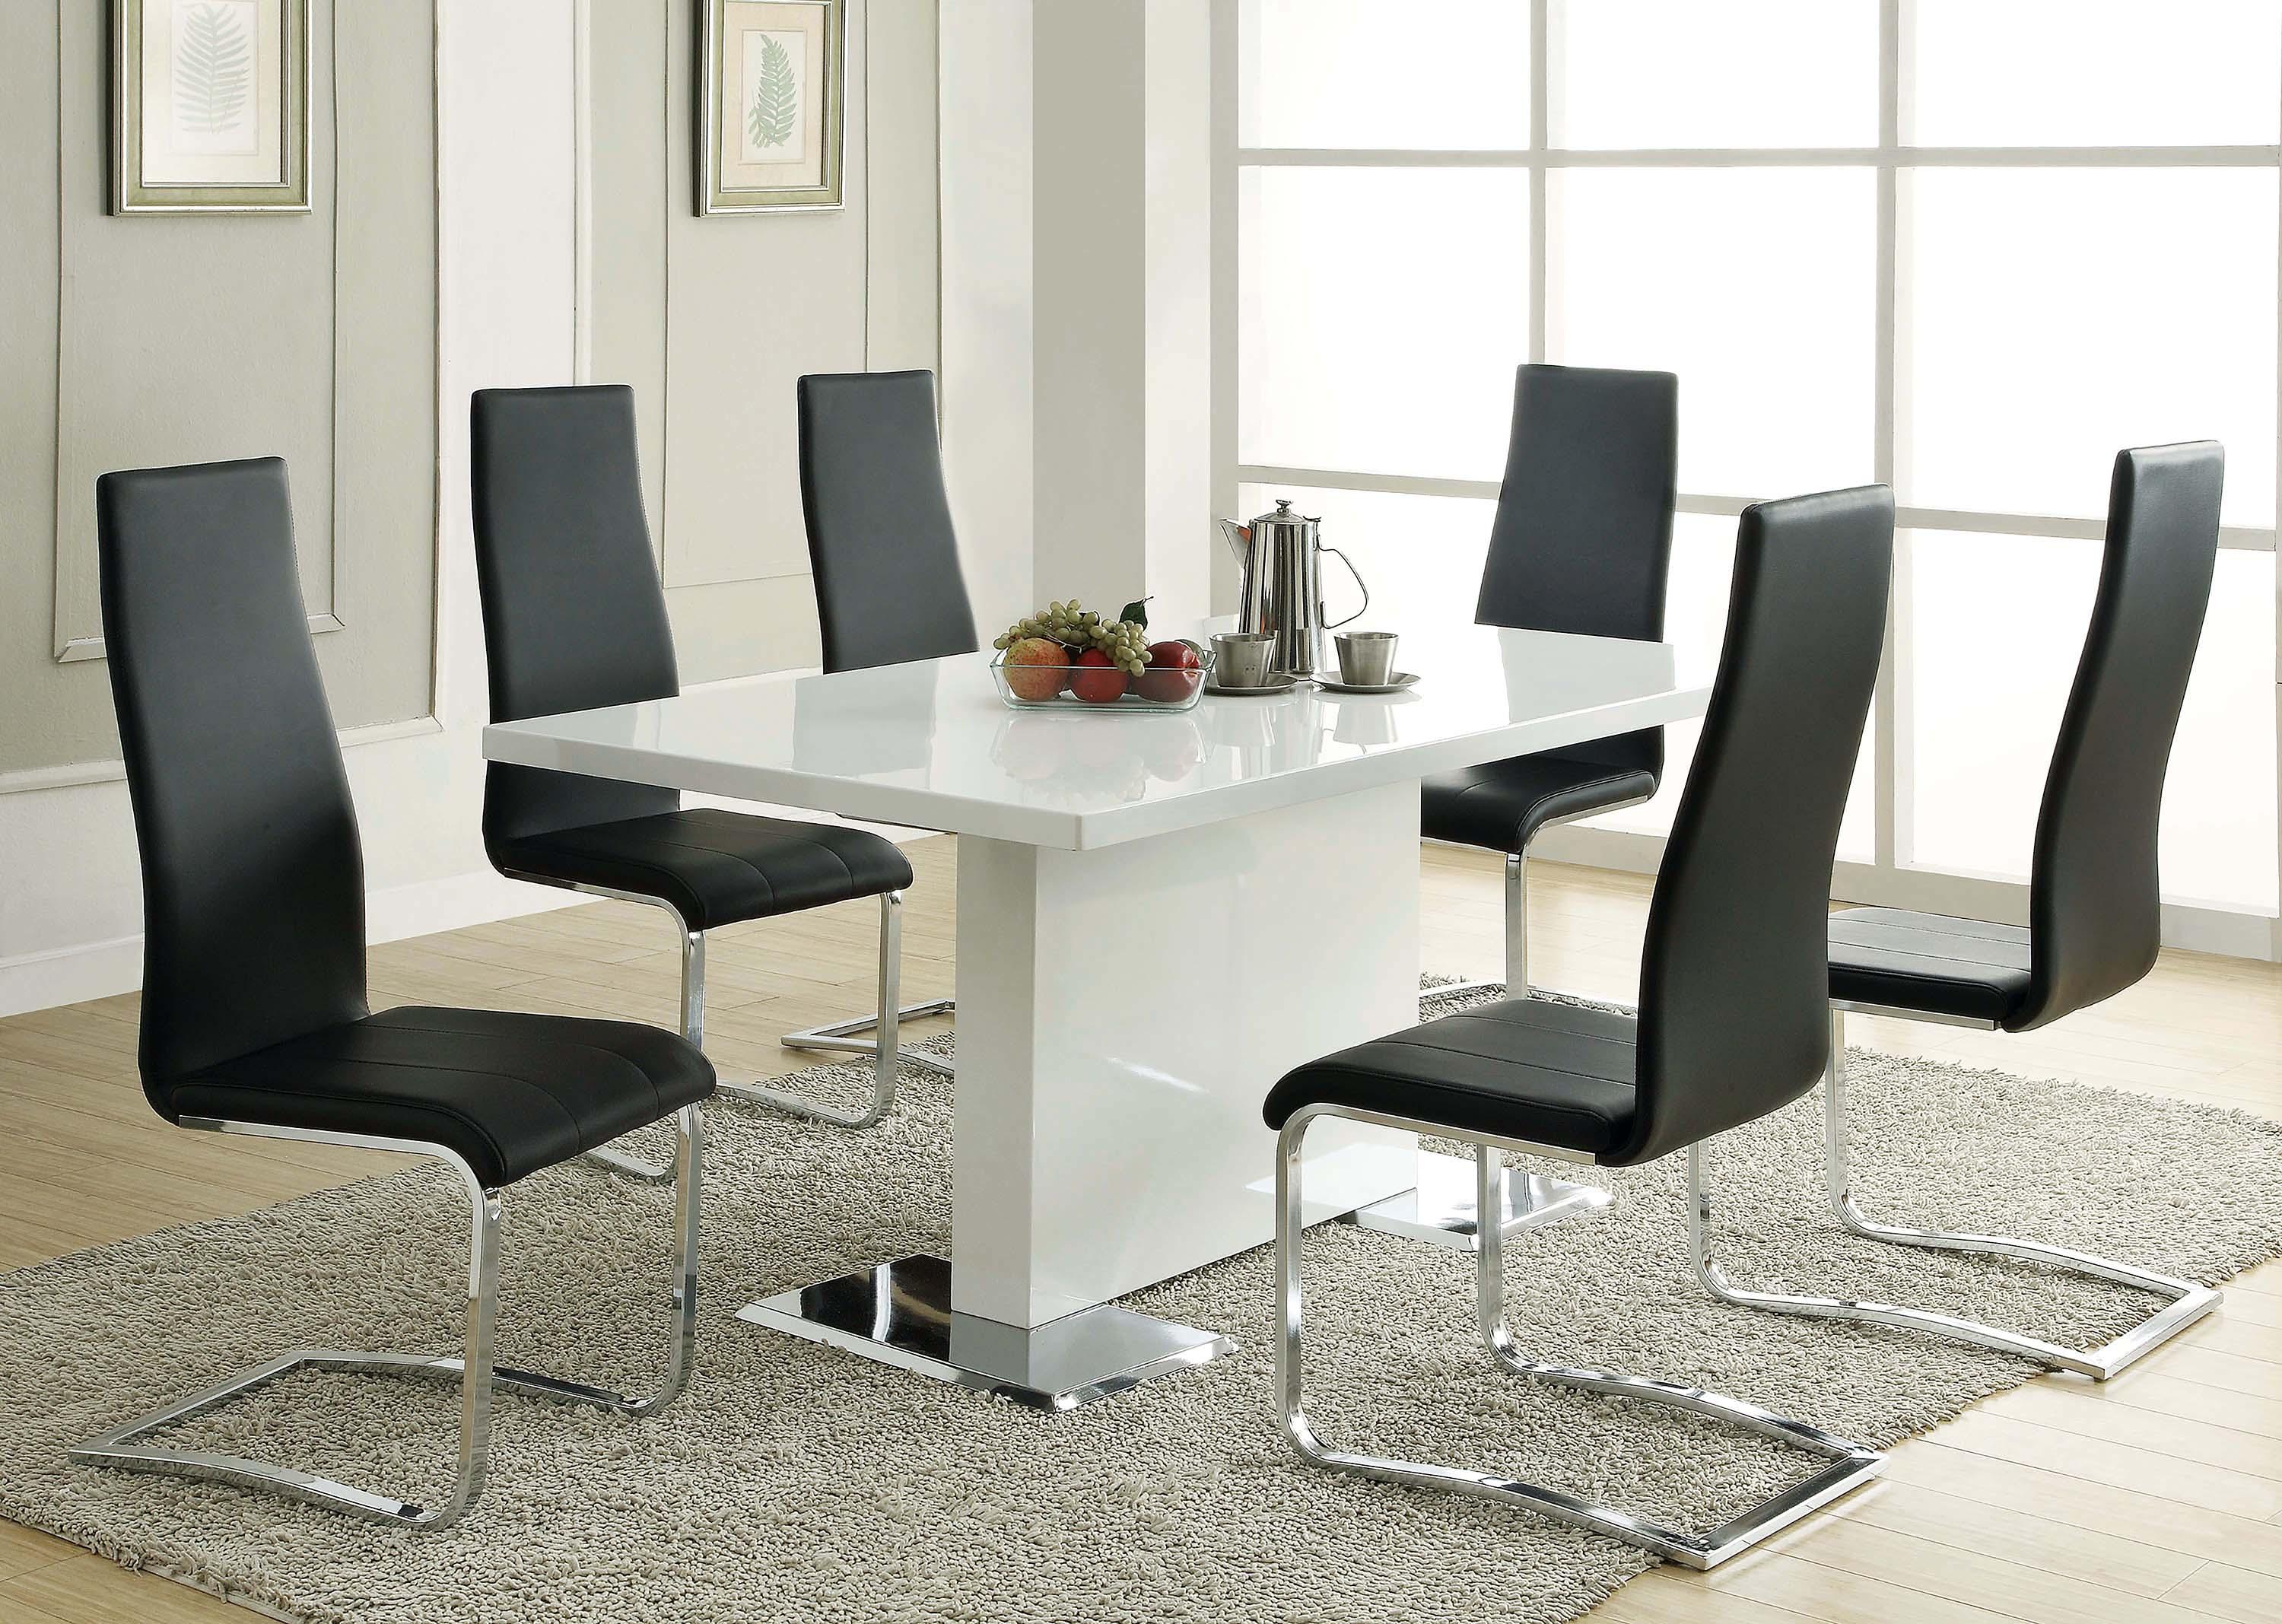 

    
Contemporary Black Faux Leather Upholstery Dining chair Set 4 pc Stanton Coaster
